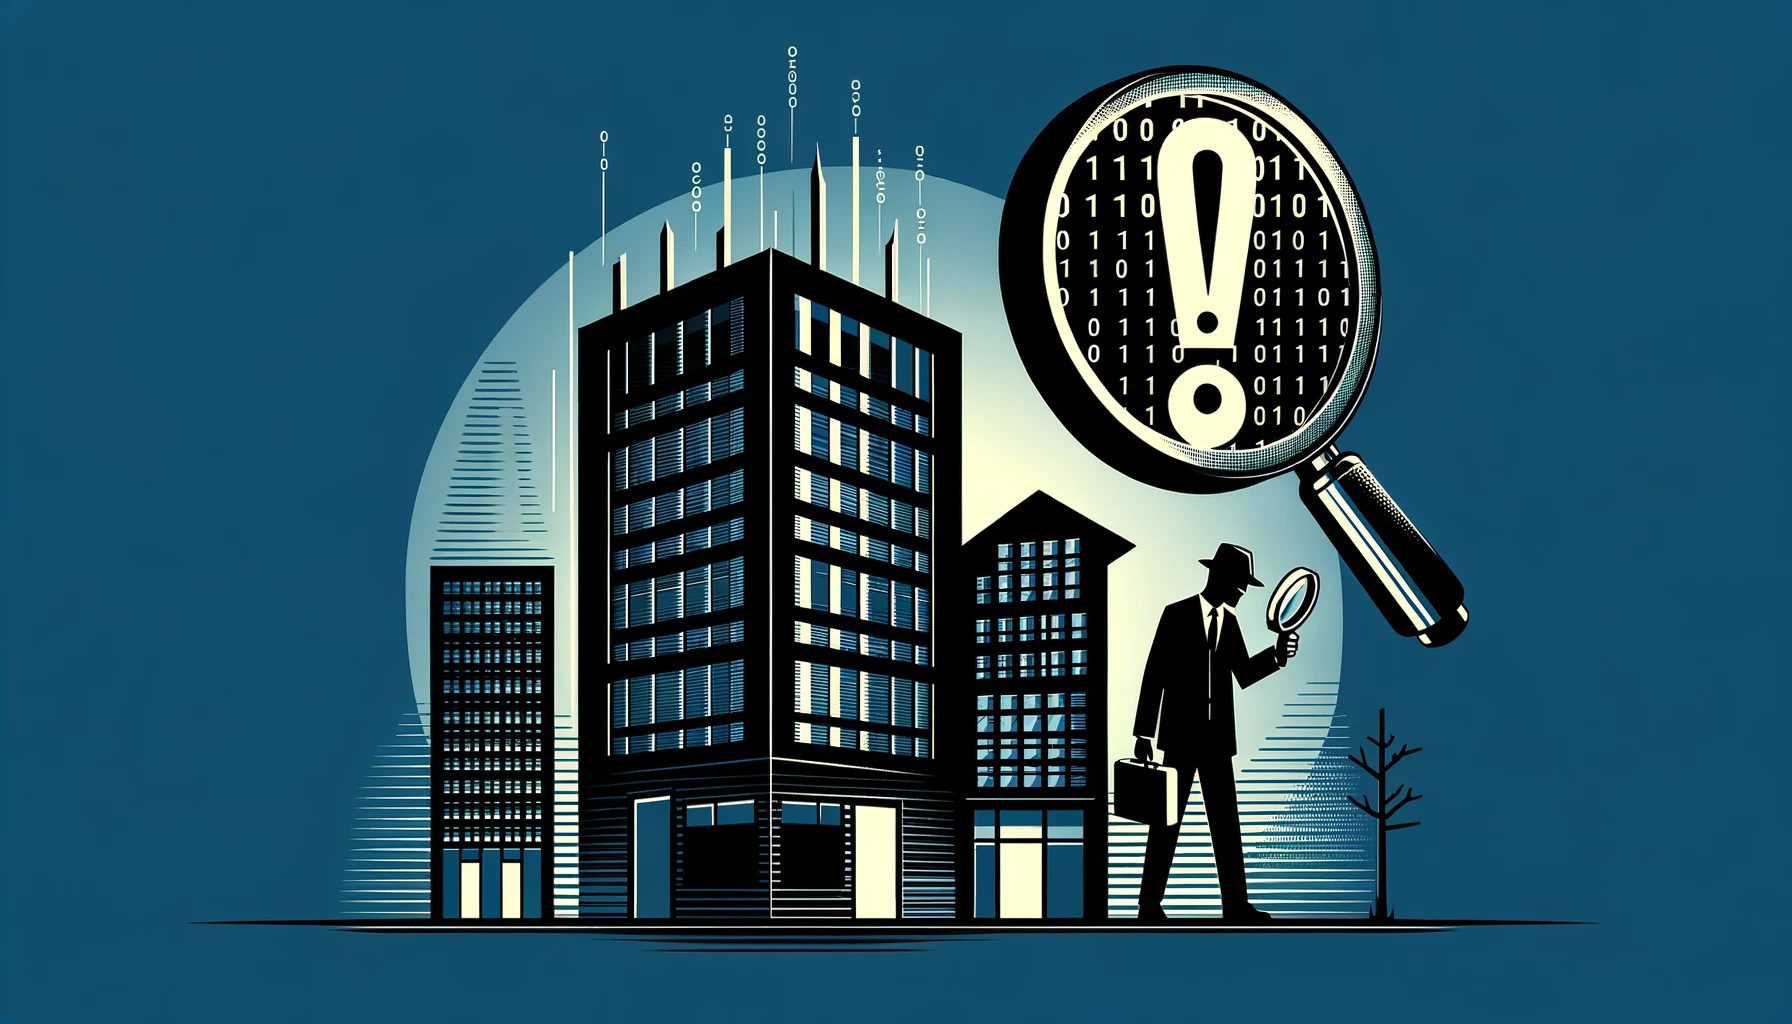 A simple image depicting a forensic investigation by a company following a data breach. The design features the silhouette of an engineer with a magnifying glass in front of a corporate building, examining data and binary codes (0s and 1s). A warning symbol, an exclamation mark, is prominently featured in the background, emphasizing the seriousness of the data breach. The color scheme primarily includes shades of blue and black, creating a professional and solemn atmosphere. The image should convey the meticulous and urgent nature of forensic investigations in a corporate context.